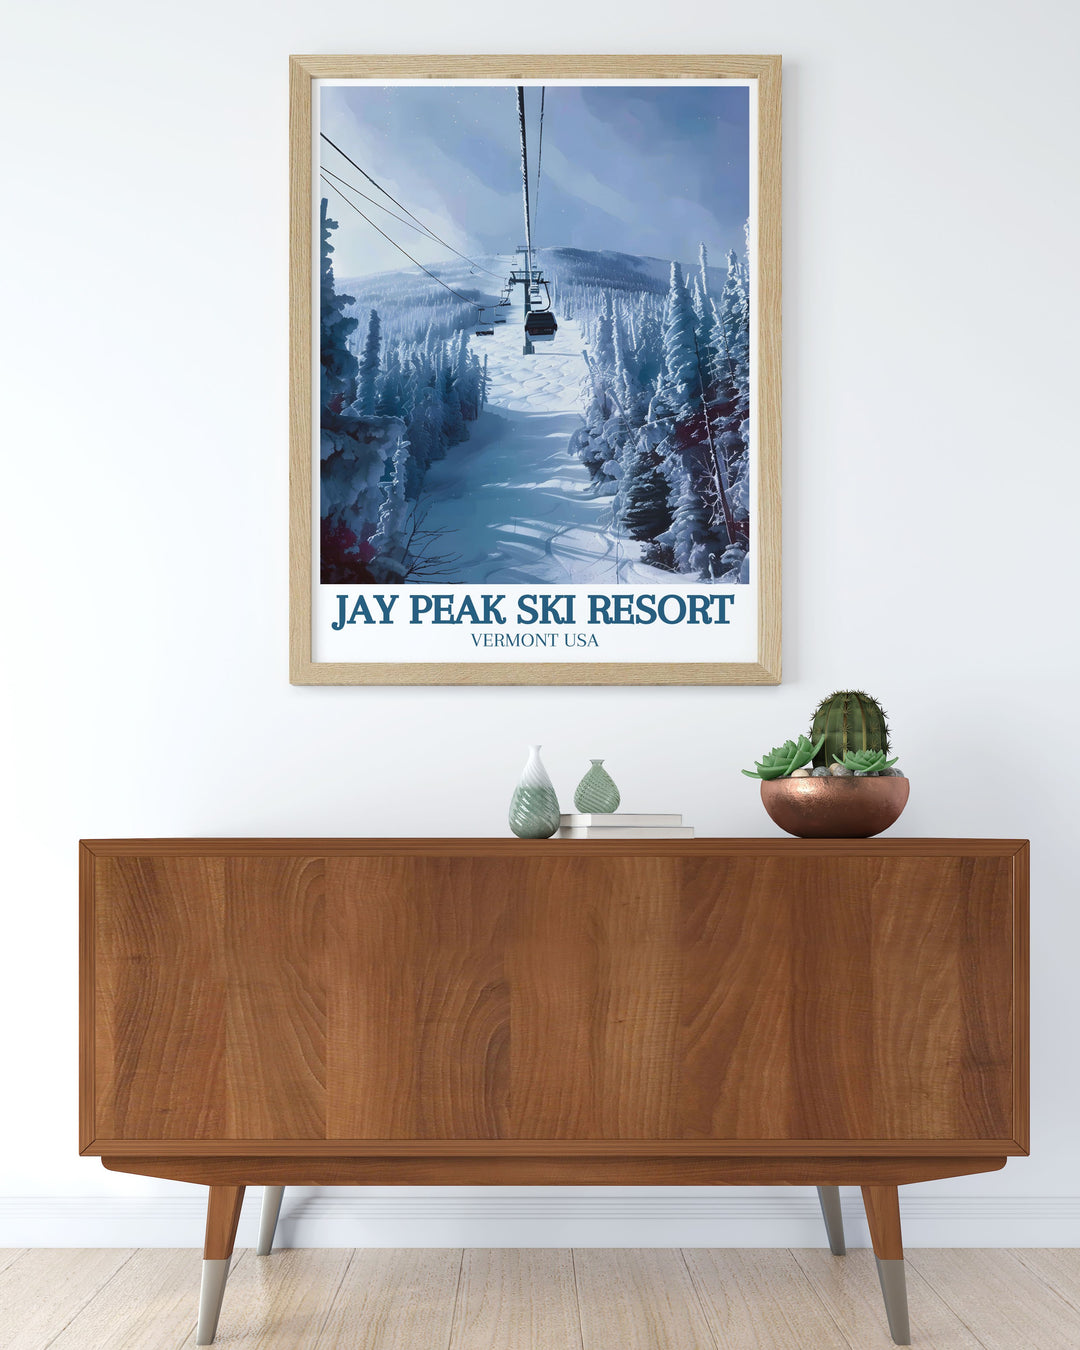 This poster captures the thrilling ski slopes of Jay Peak, making it perfect for those who love winter sports and mountainous landscapes.